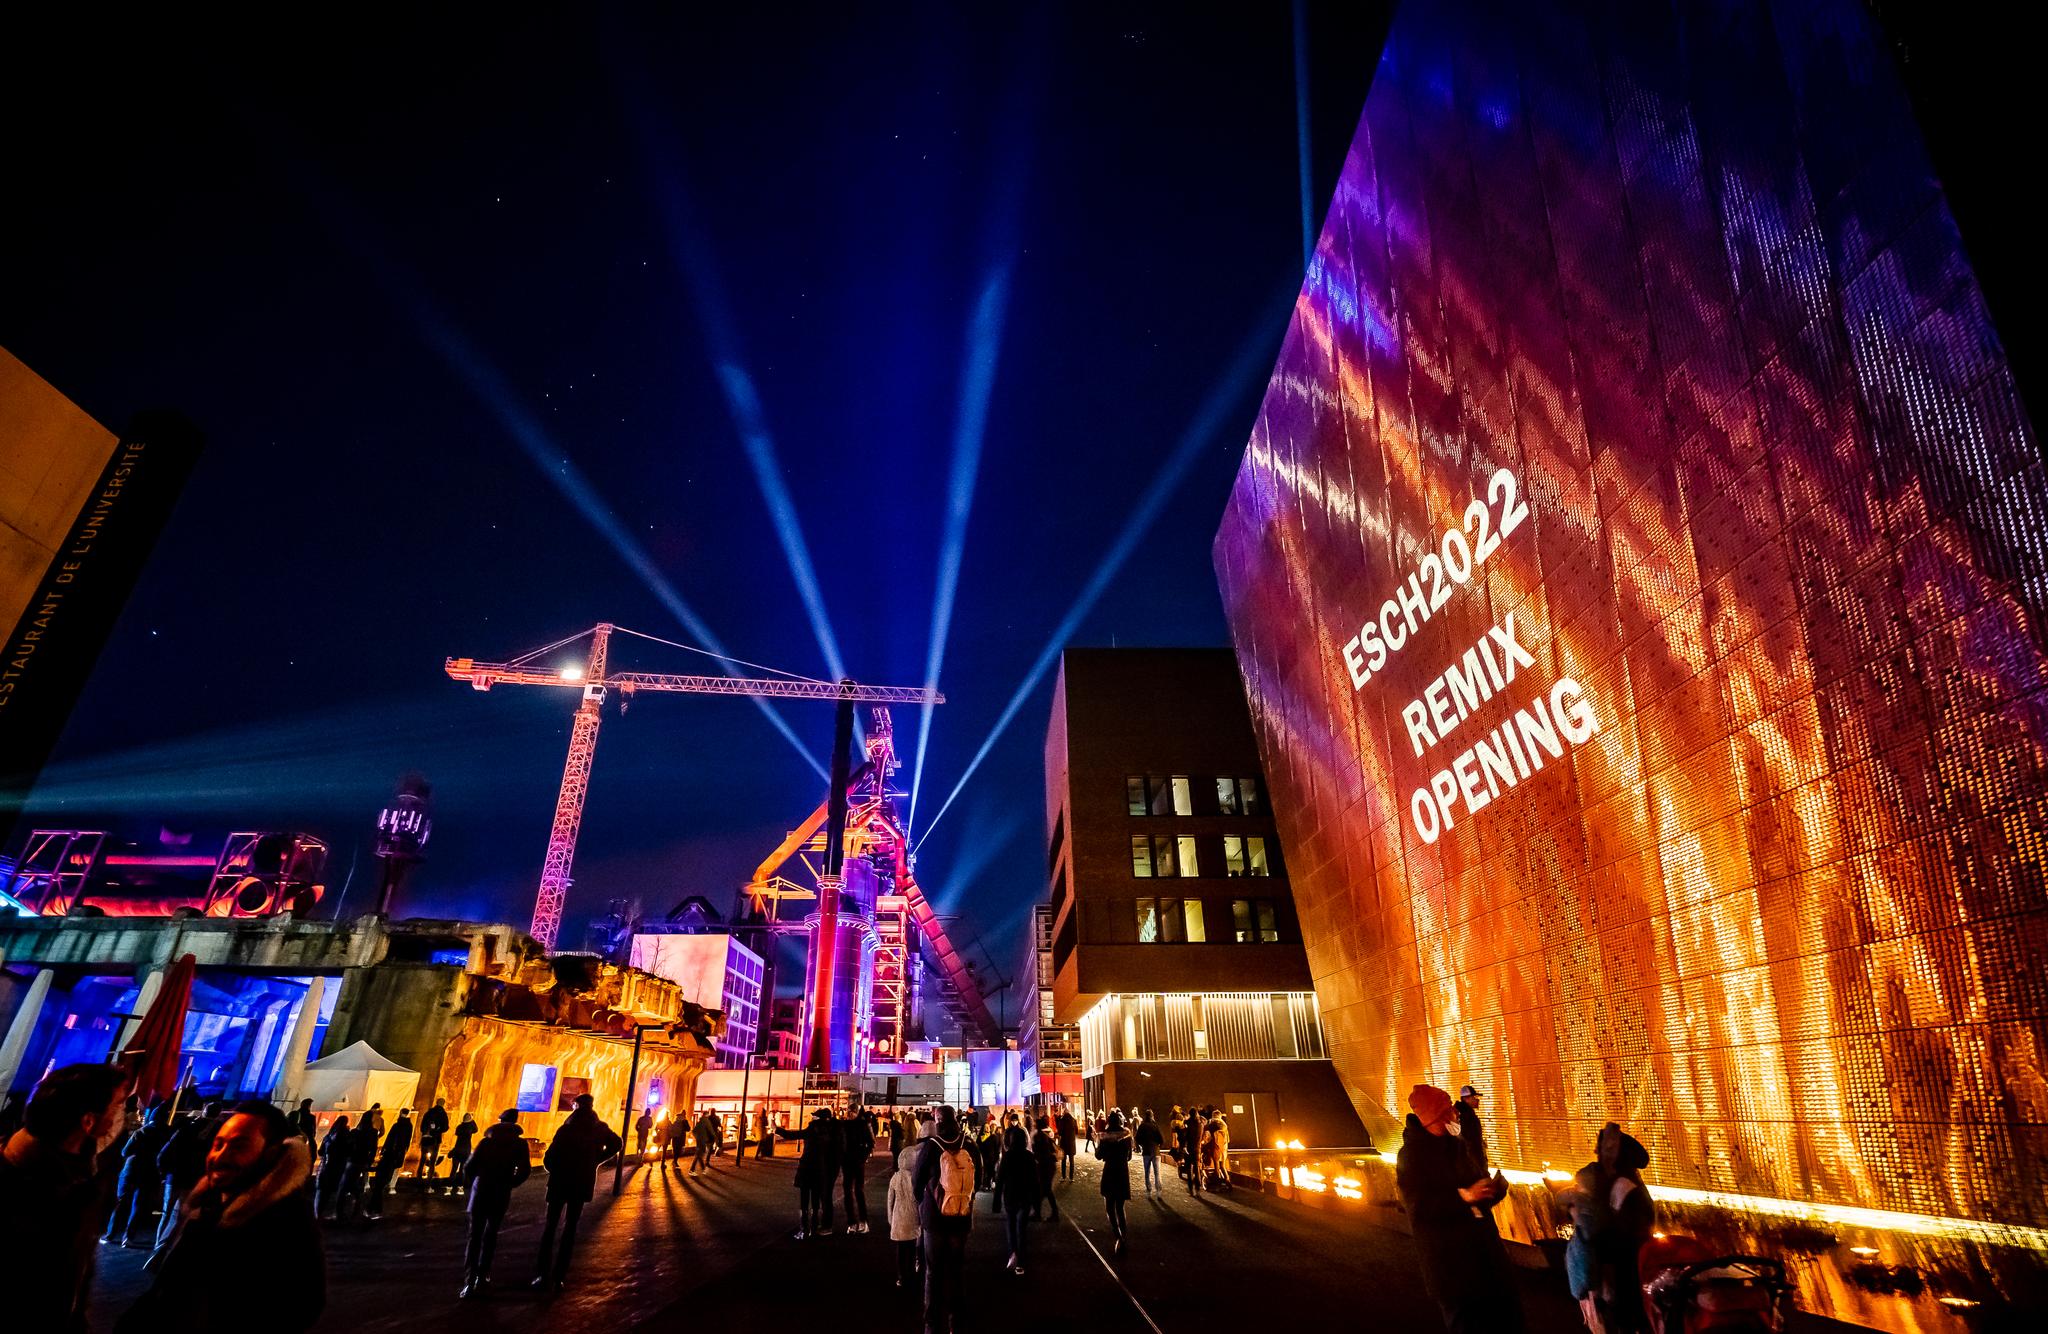 Outdoor scene at night. "ESCH2022 REMIX OPENING" is projected on a large stylized wall. A crane and spotlights are in the background and participants mill about.